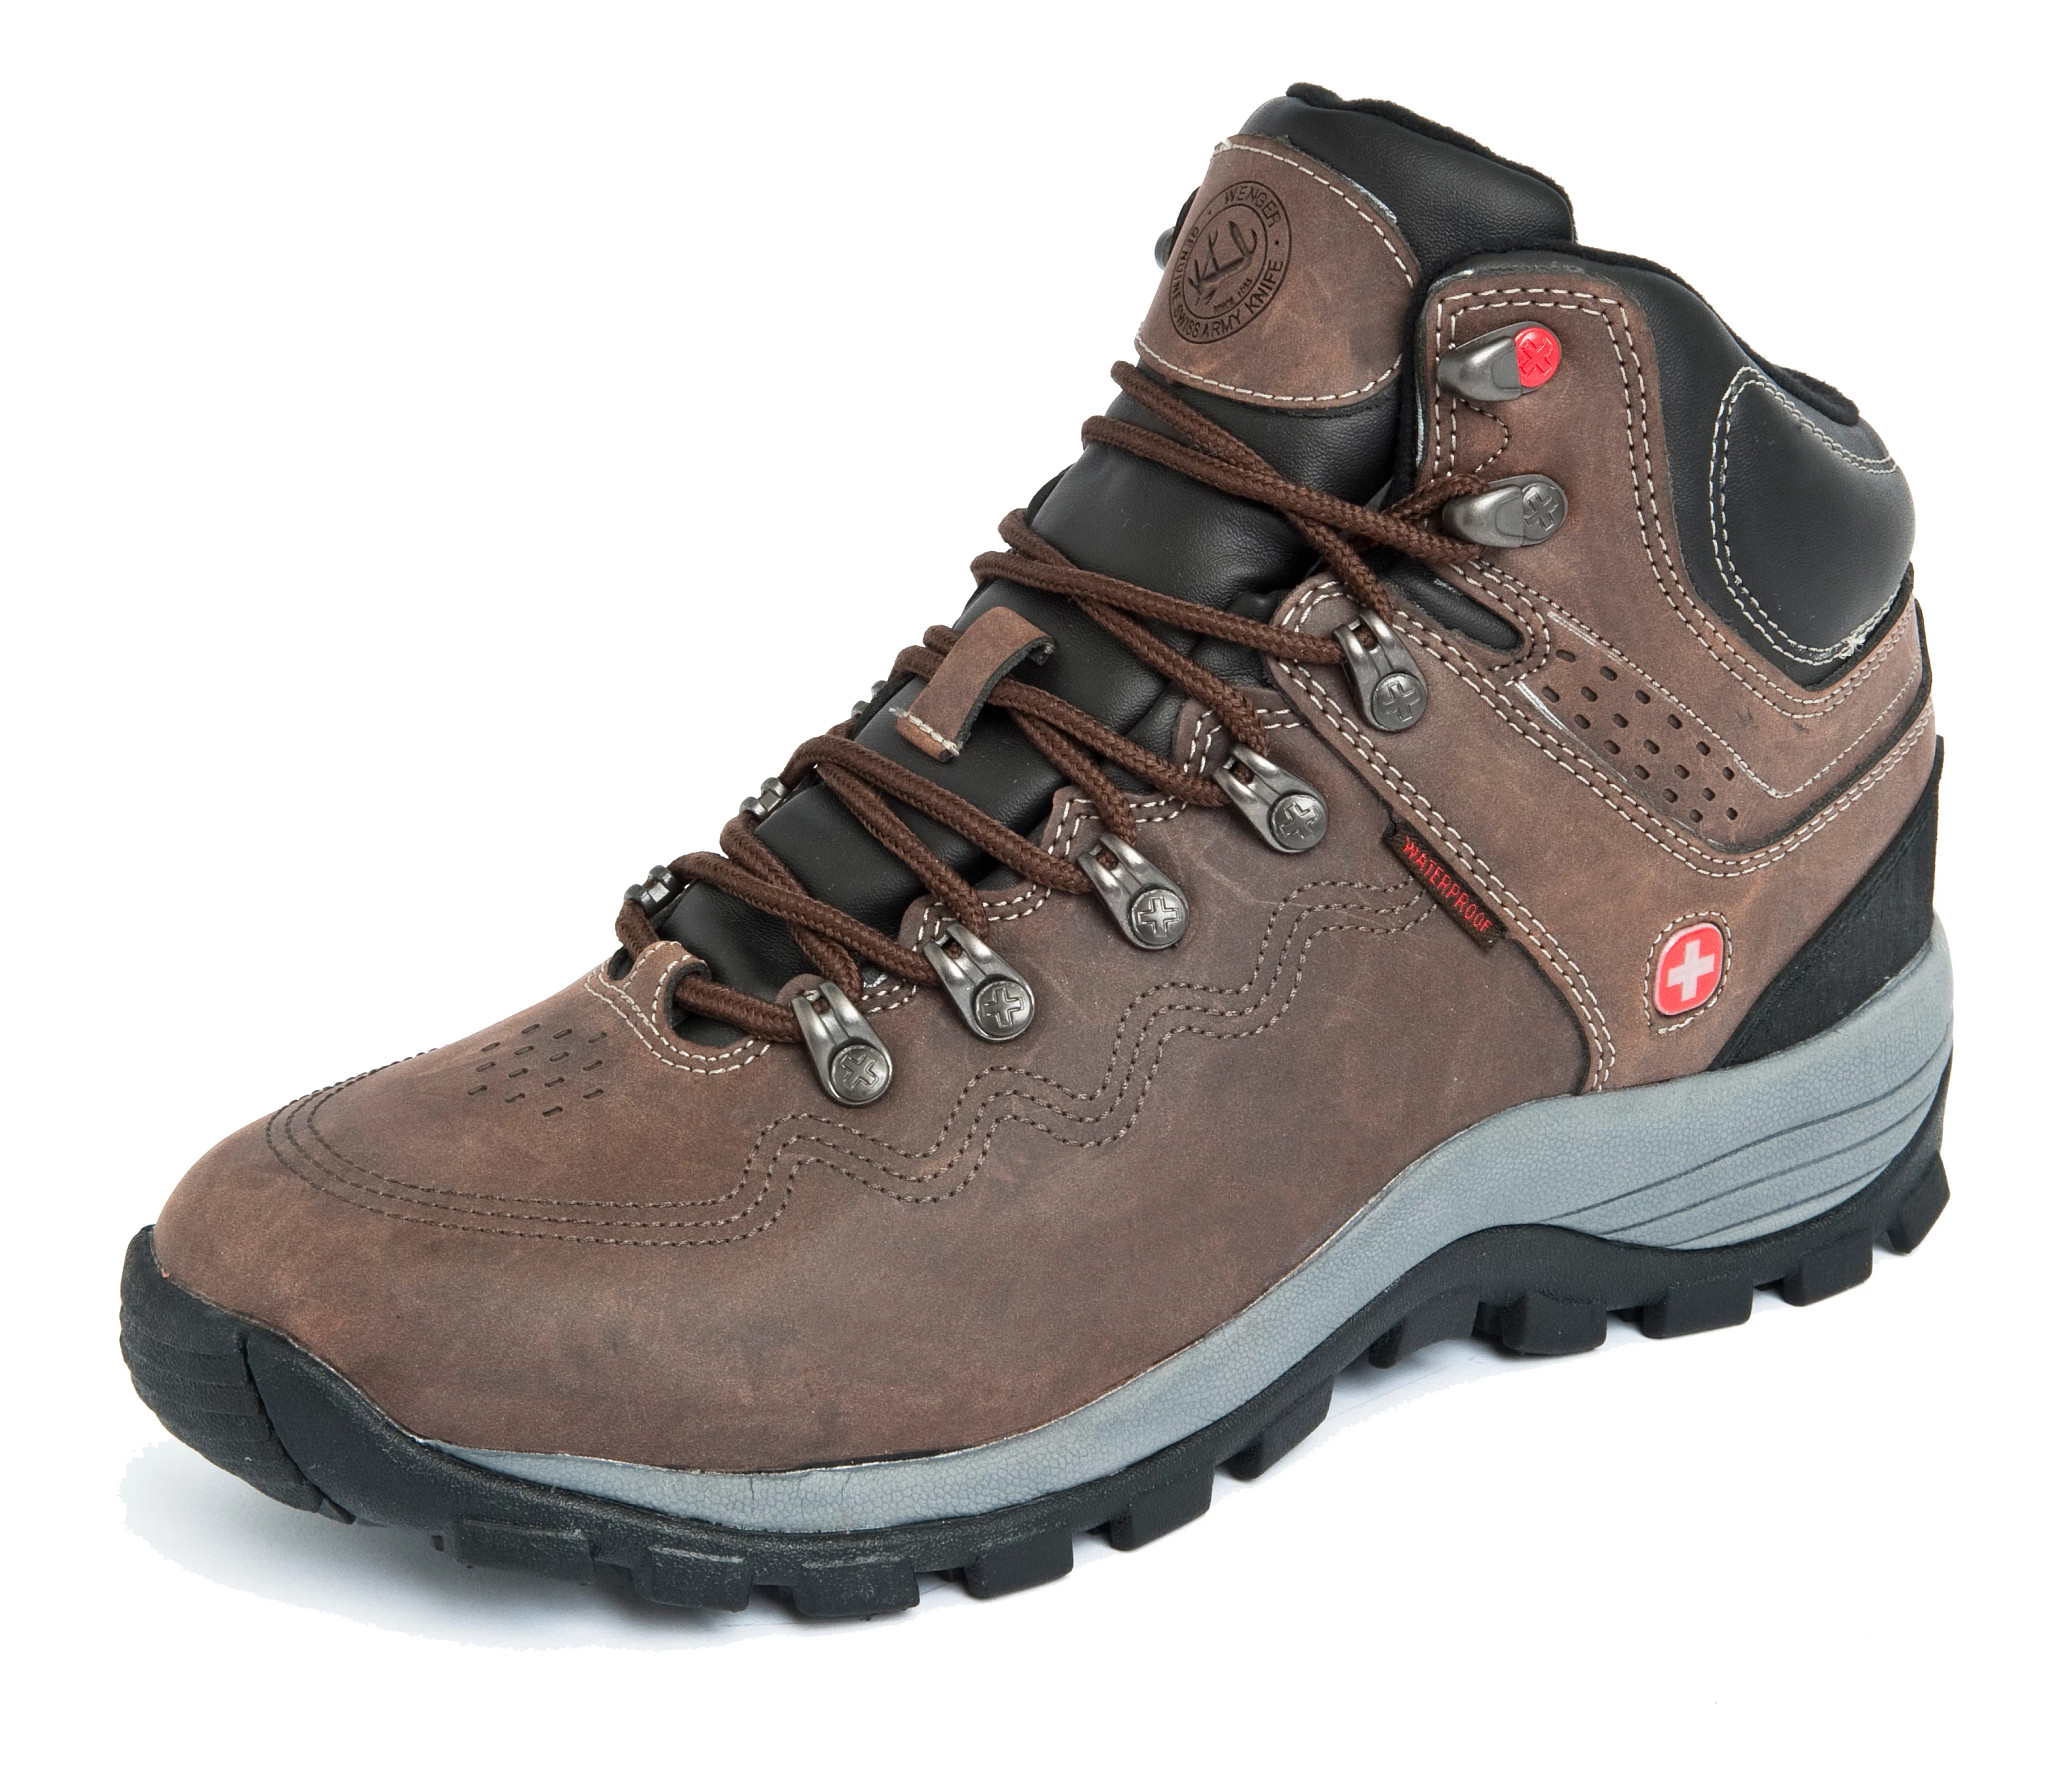 Mens Wenger Swiss Army Outback Hiker Hiking Shoe